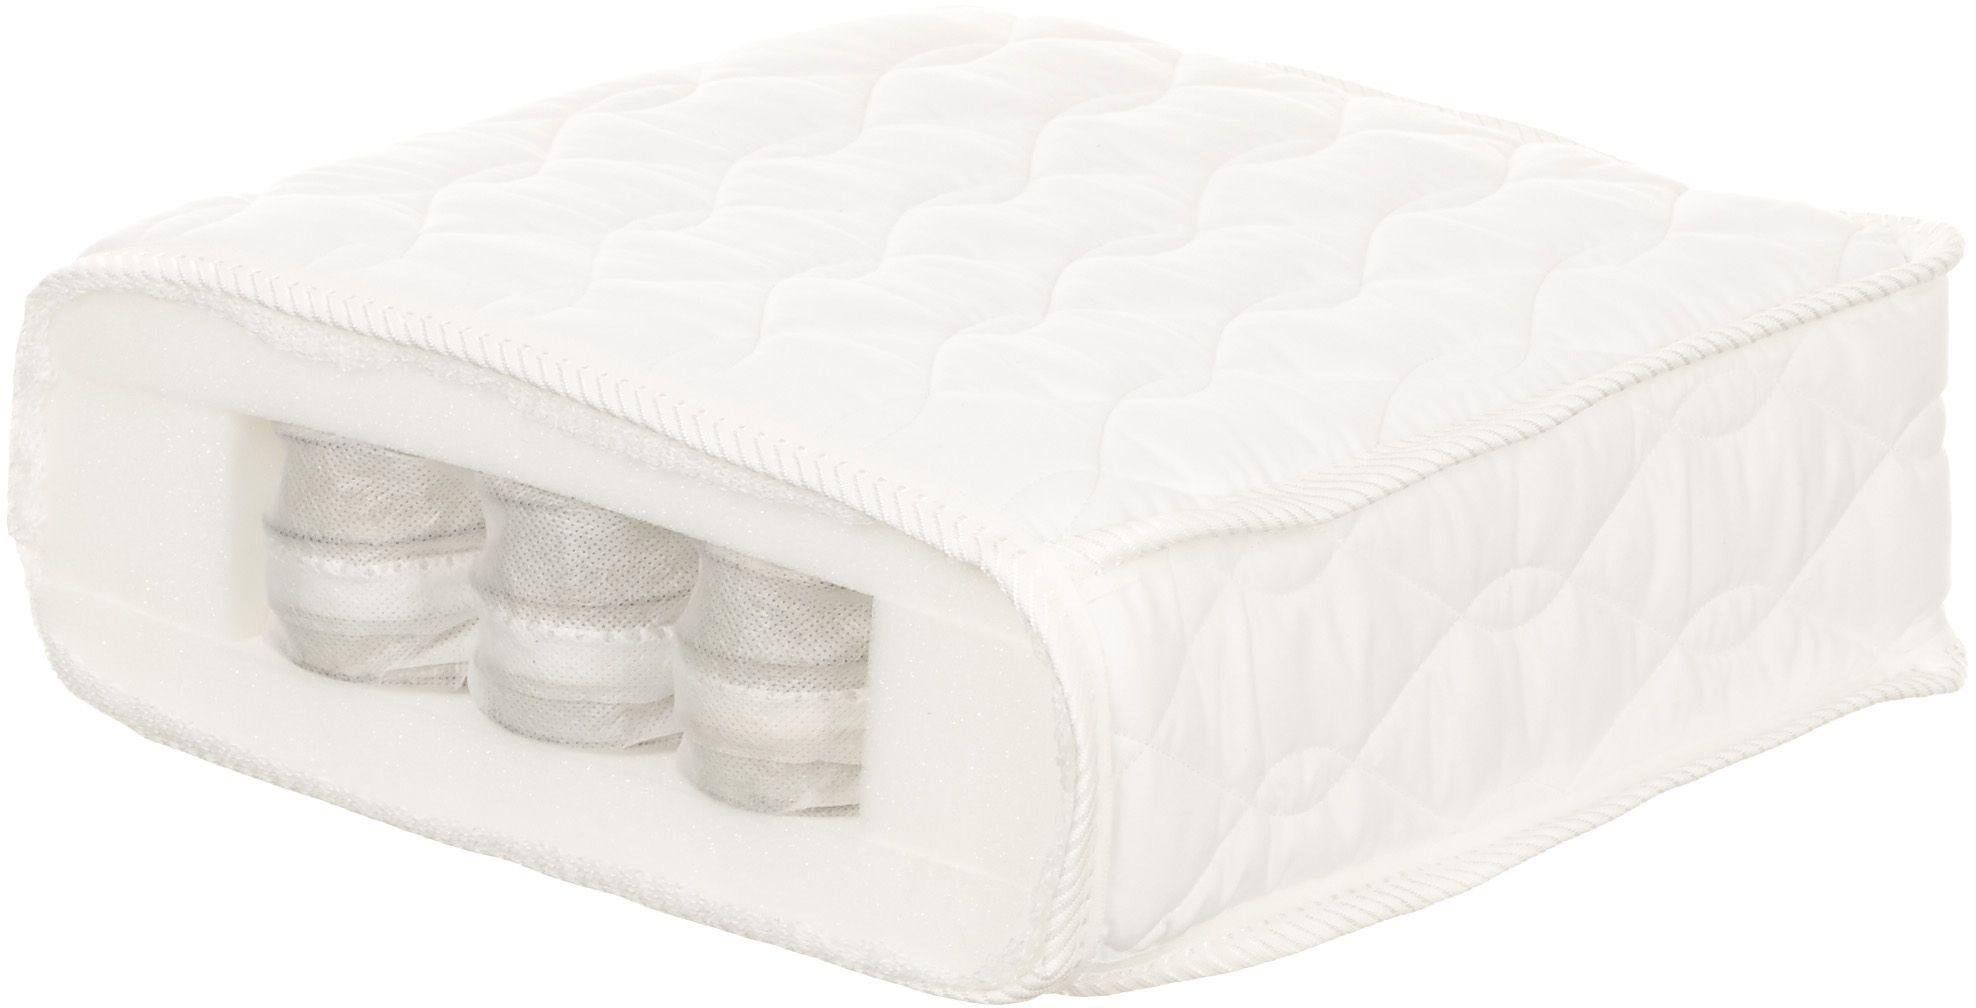 which cot bed mattress